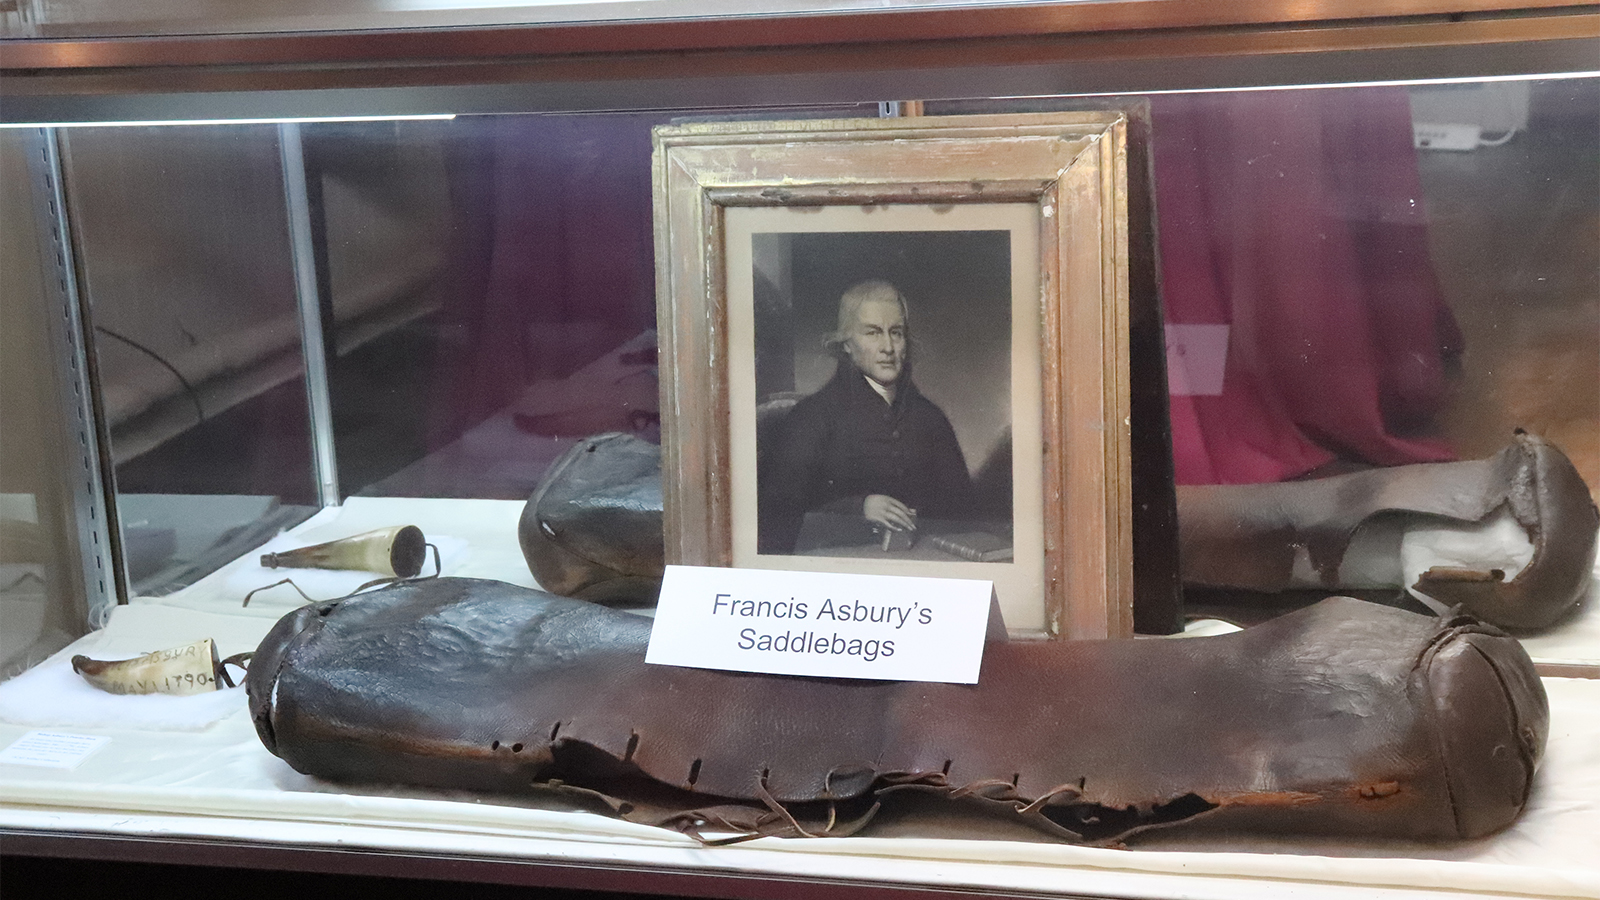 Francis Asbury’s powder horn, left, and saddlebags on display at Historic St. George’s United Methodist Church, Saturday, Oct. 30, 2021, in Philadelphia. RNS photo by Adelle M. Banks